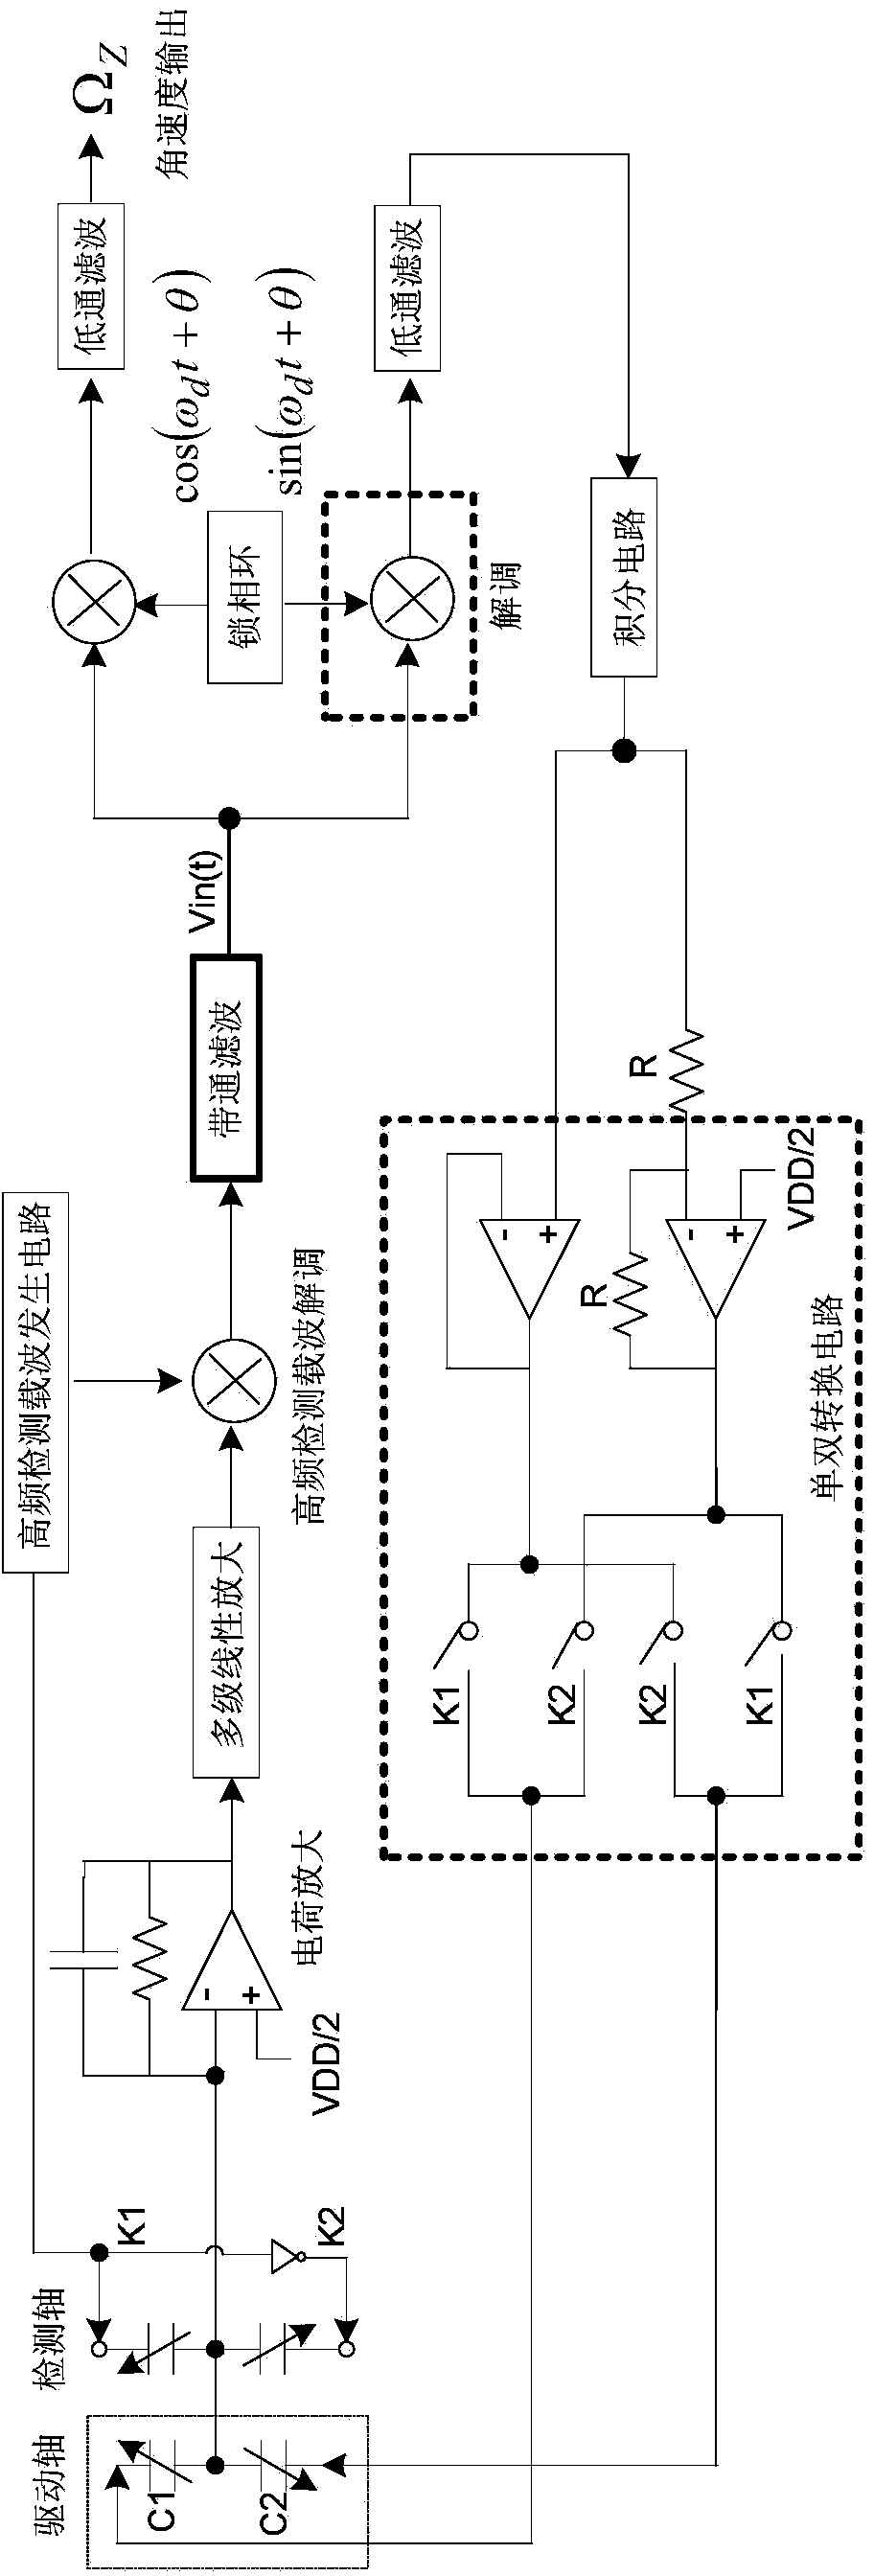 Quadrature error closed-loop compensating circuit for vibrating type silicon micromechanical gyroscope